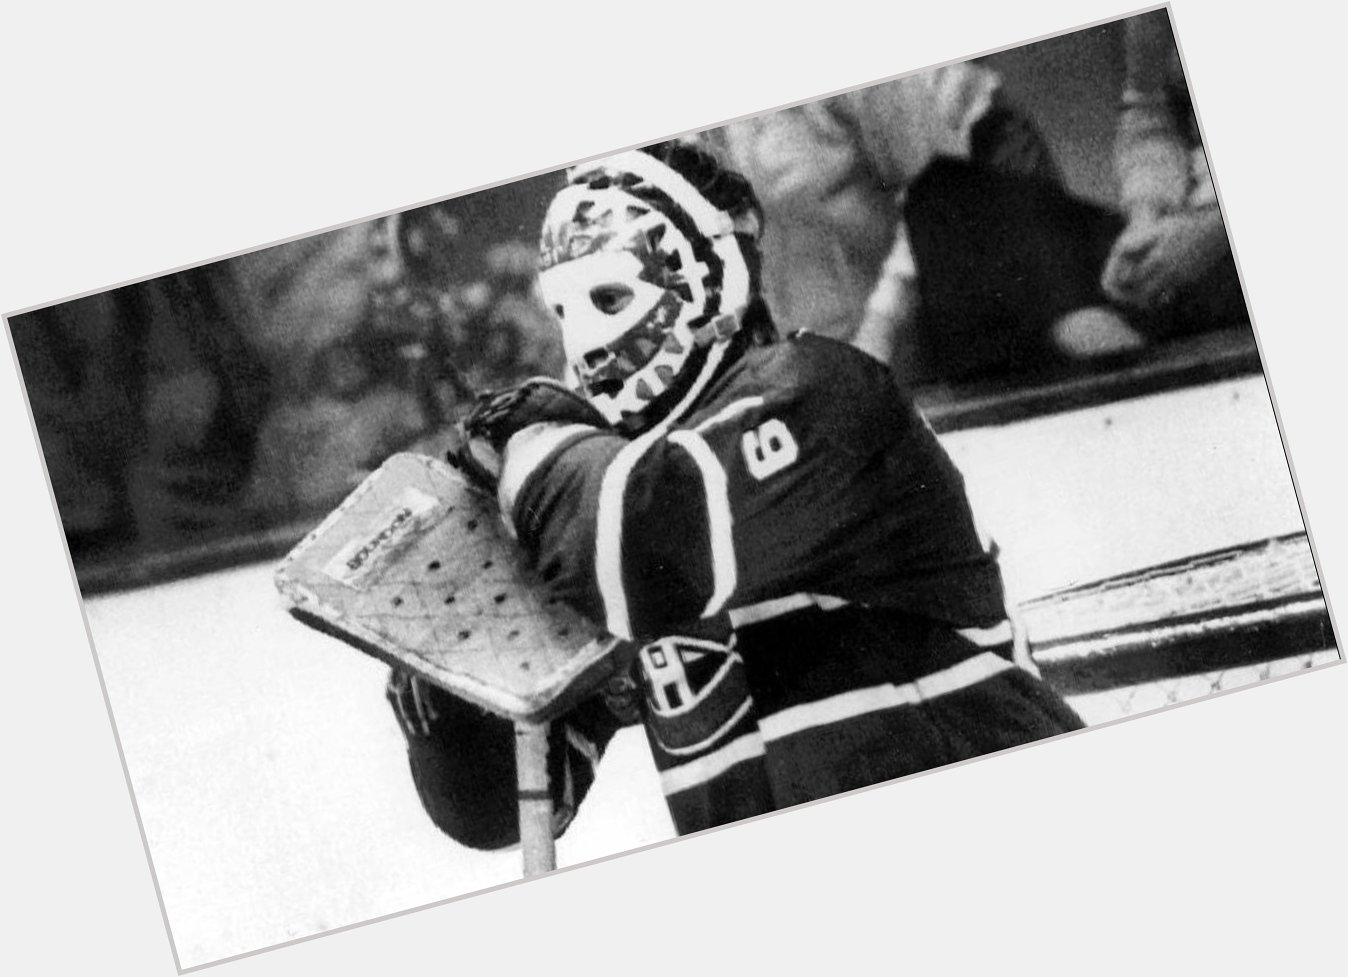 Happy 68th birthday to legend Ken Dryden. His .758 career win % is the highest in NHL history. 